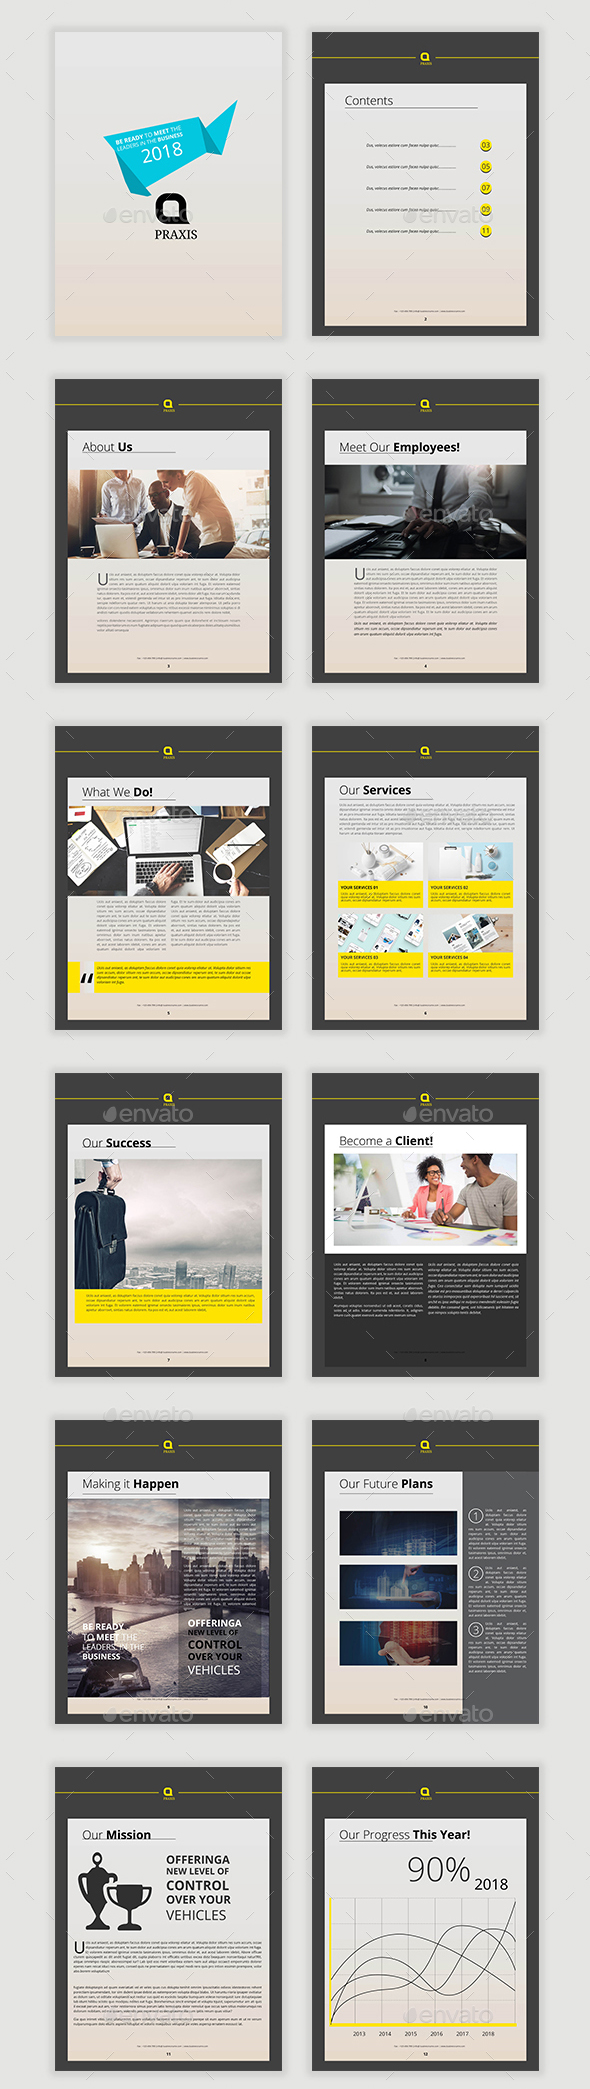 Business eBook 14 Pages